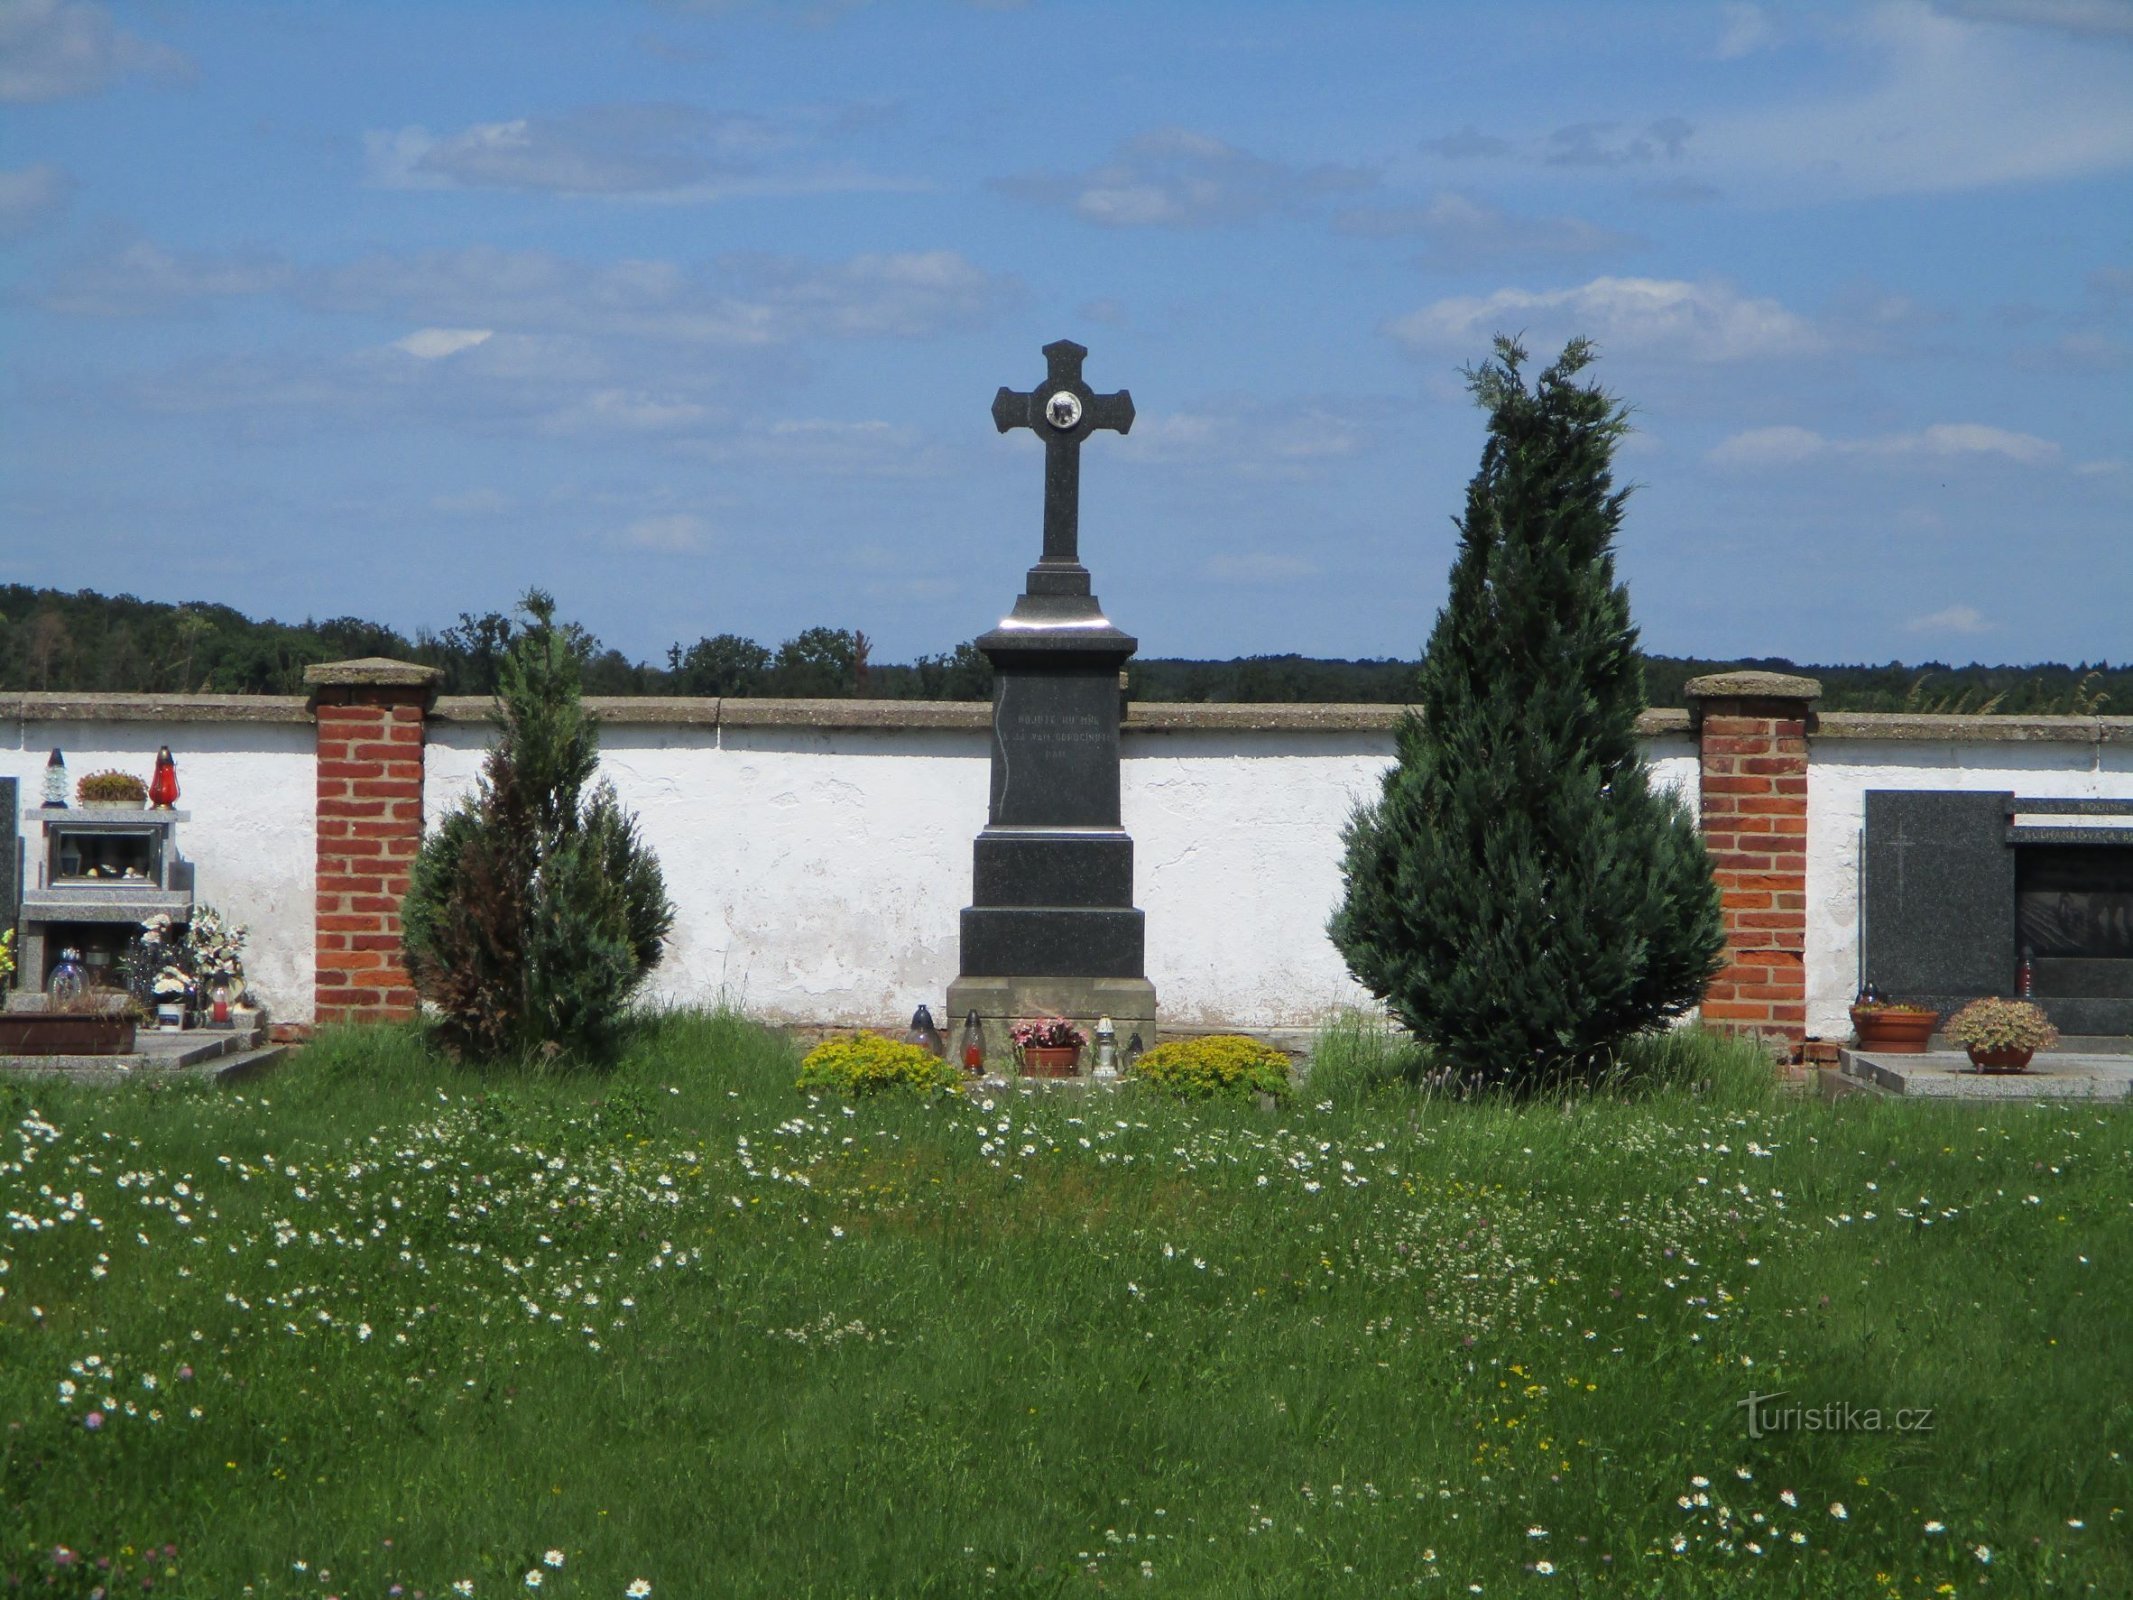 The cemetery located not far from the cross (Zvíkov, 30.6.2020)